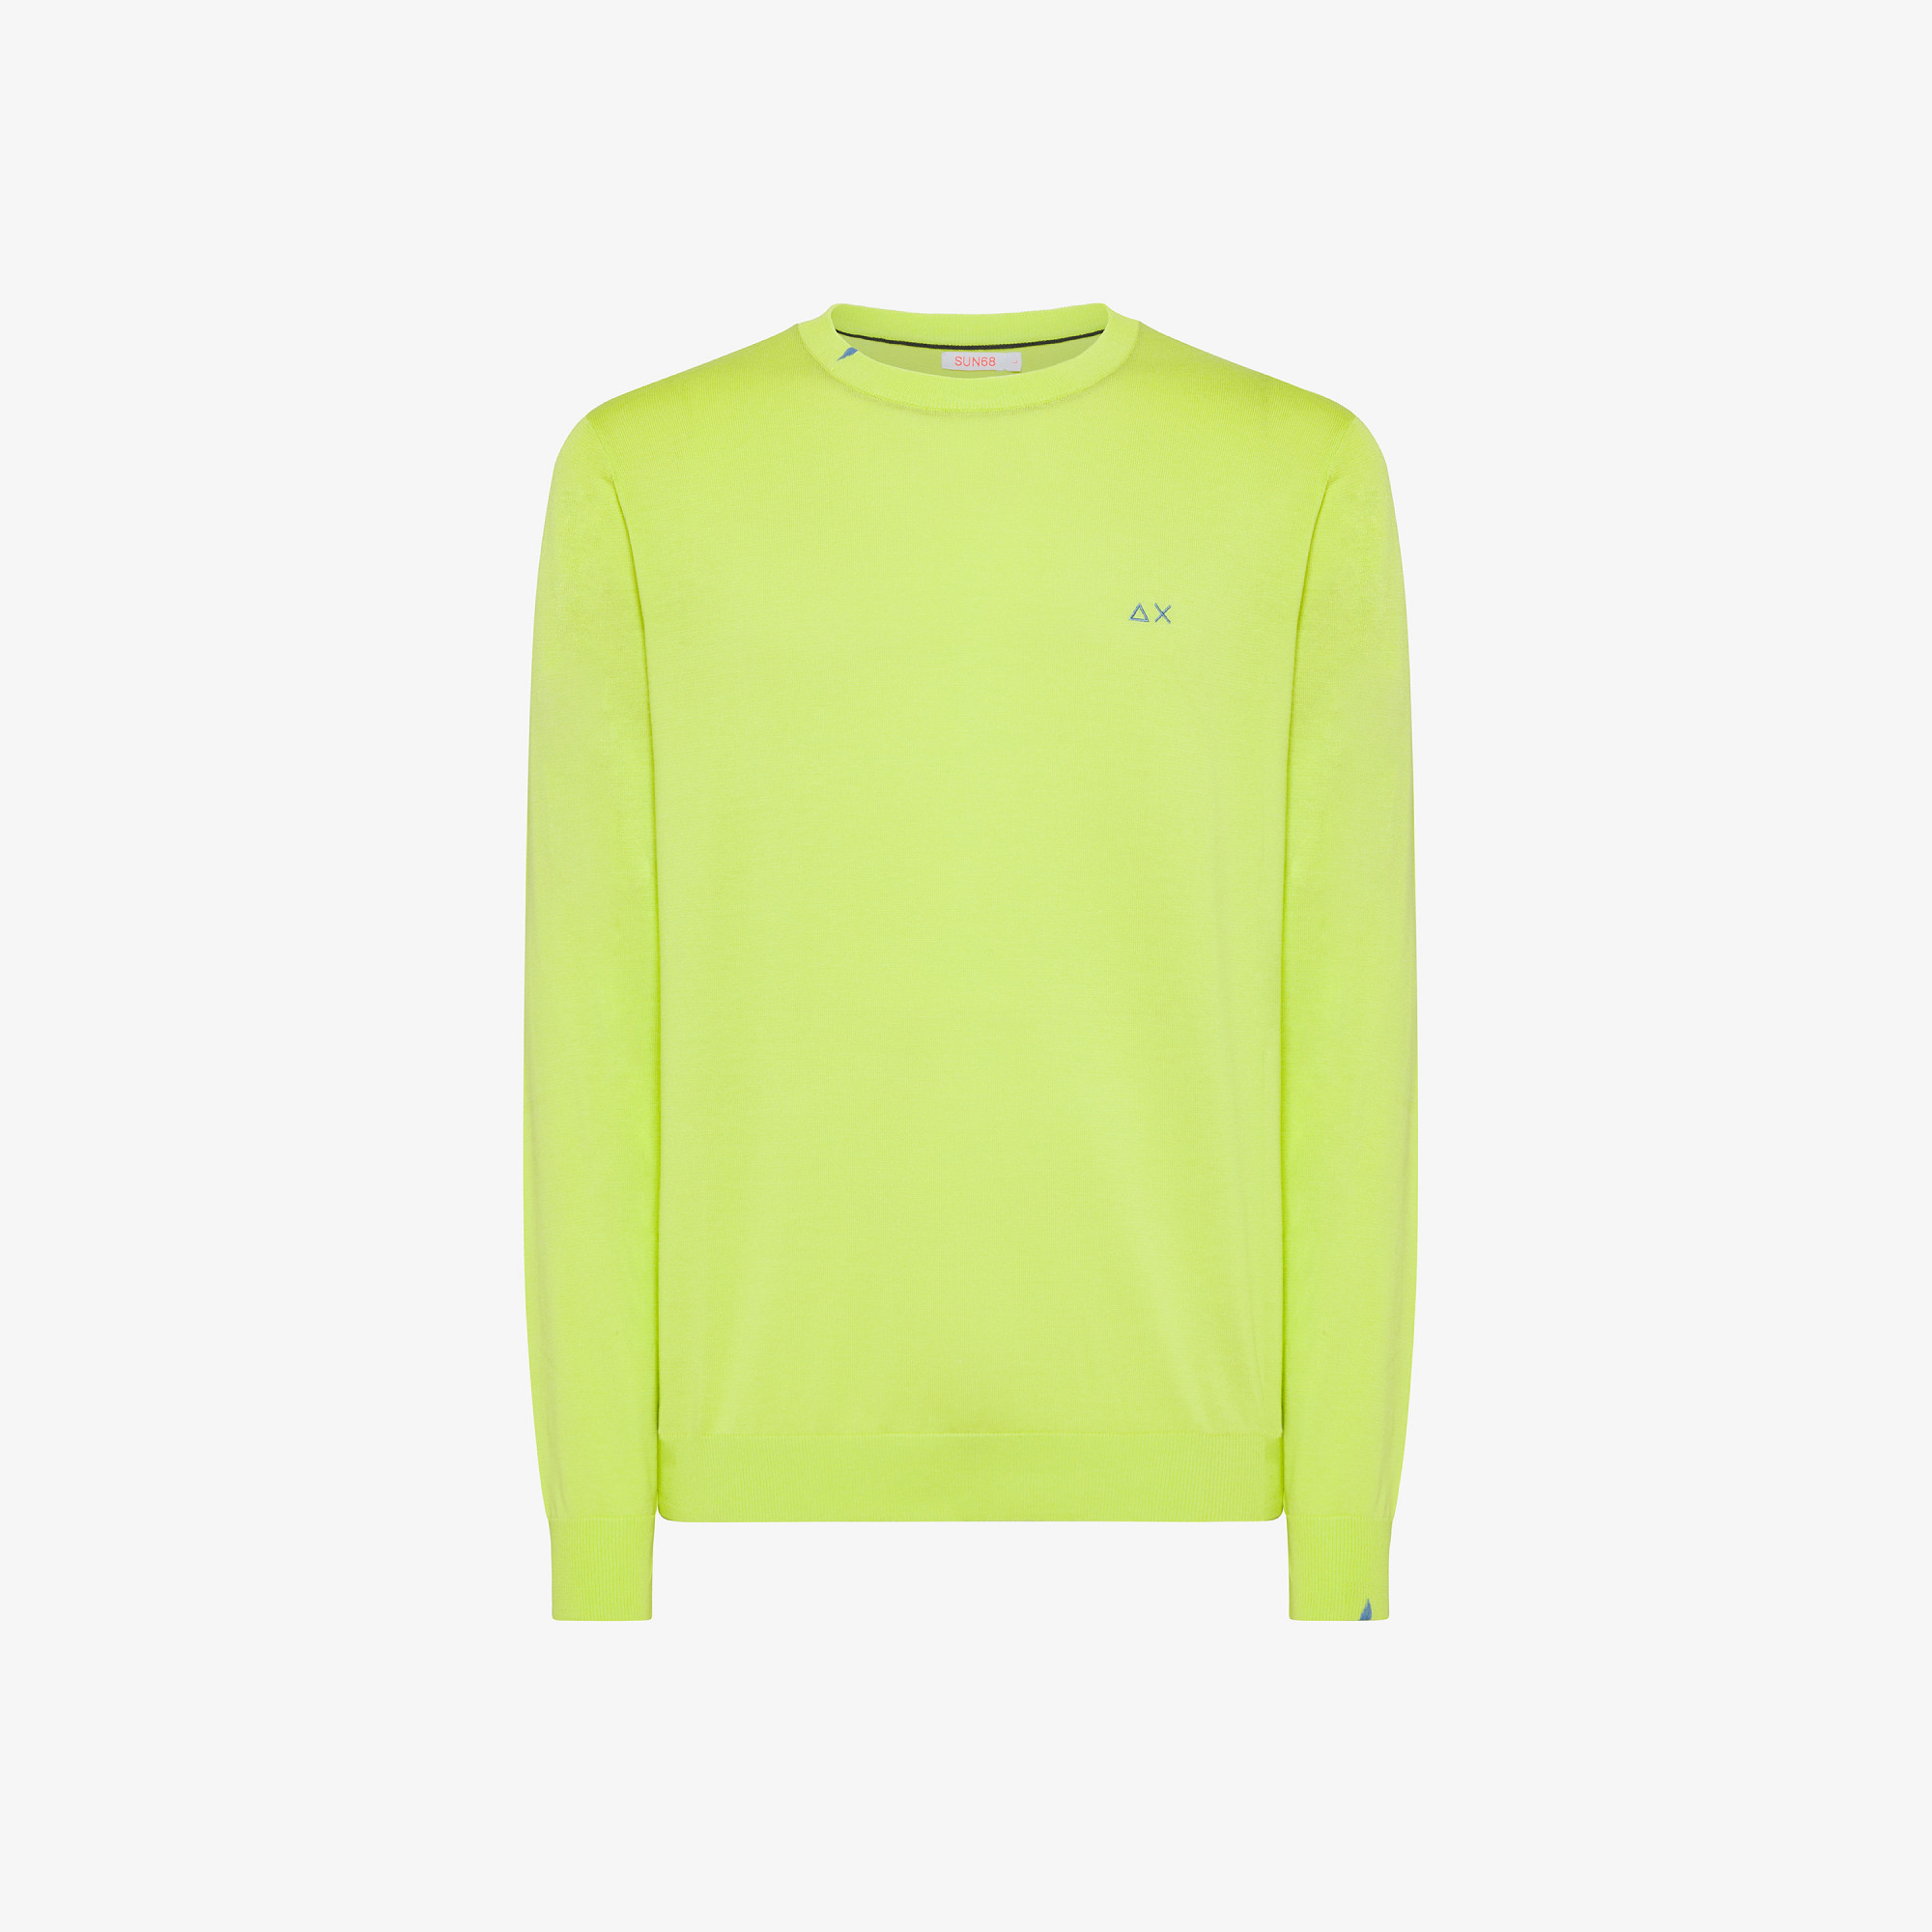 ROUND NECK SOLID LIME